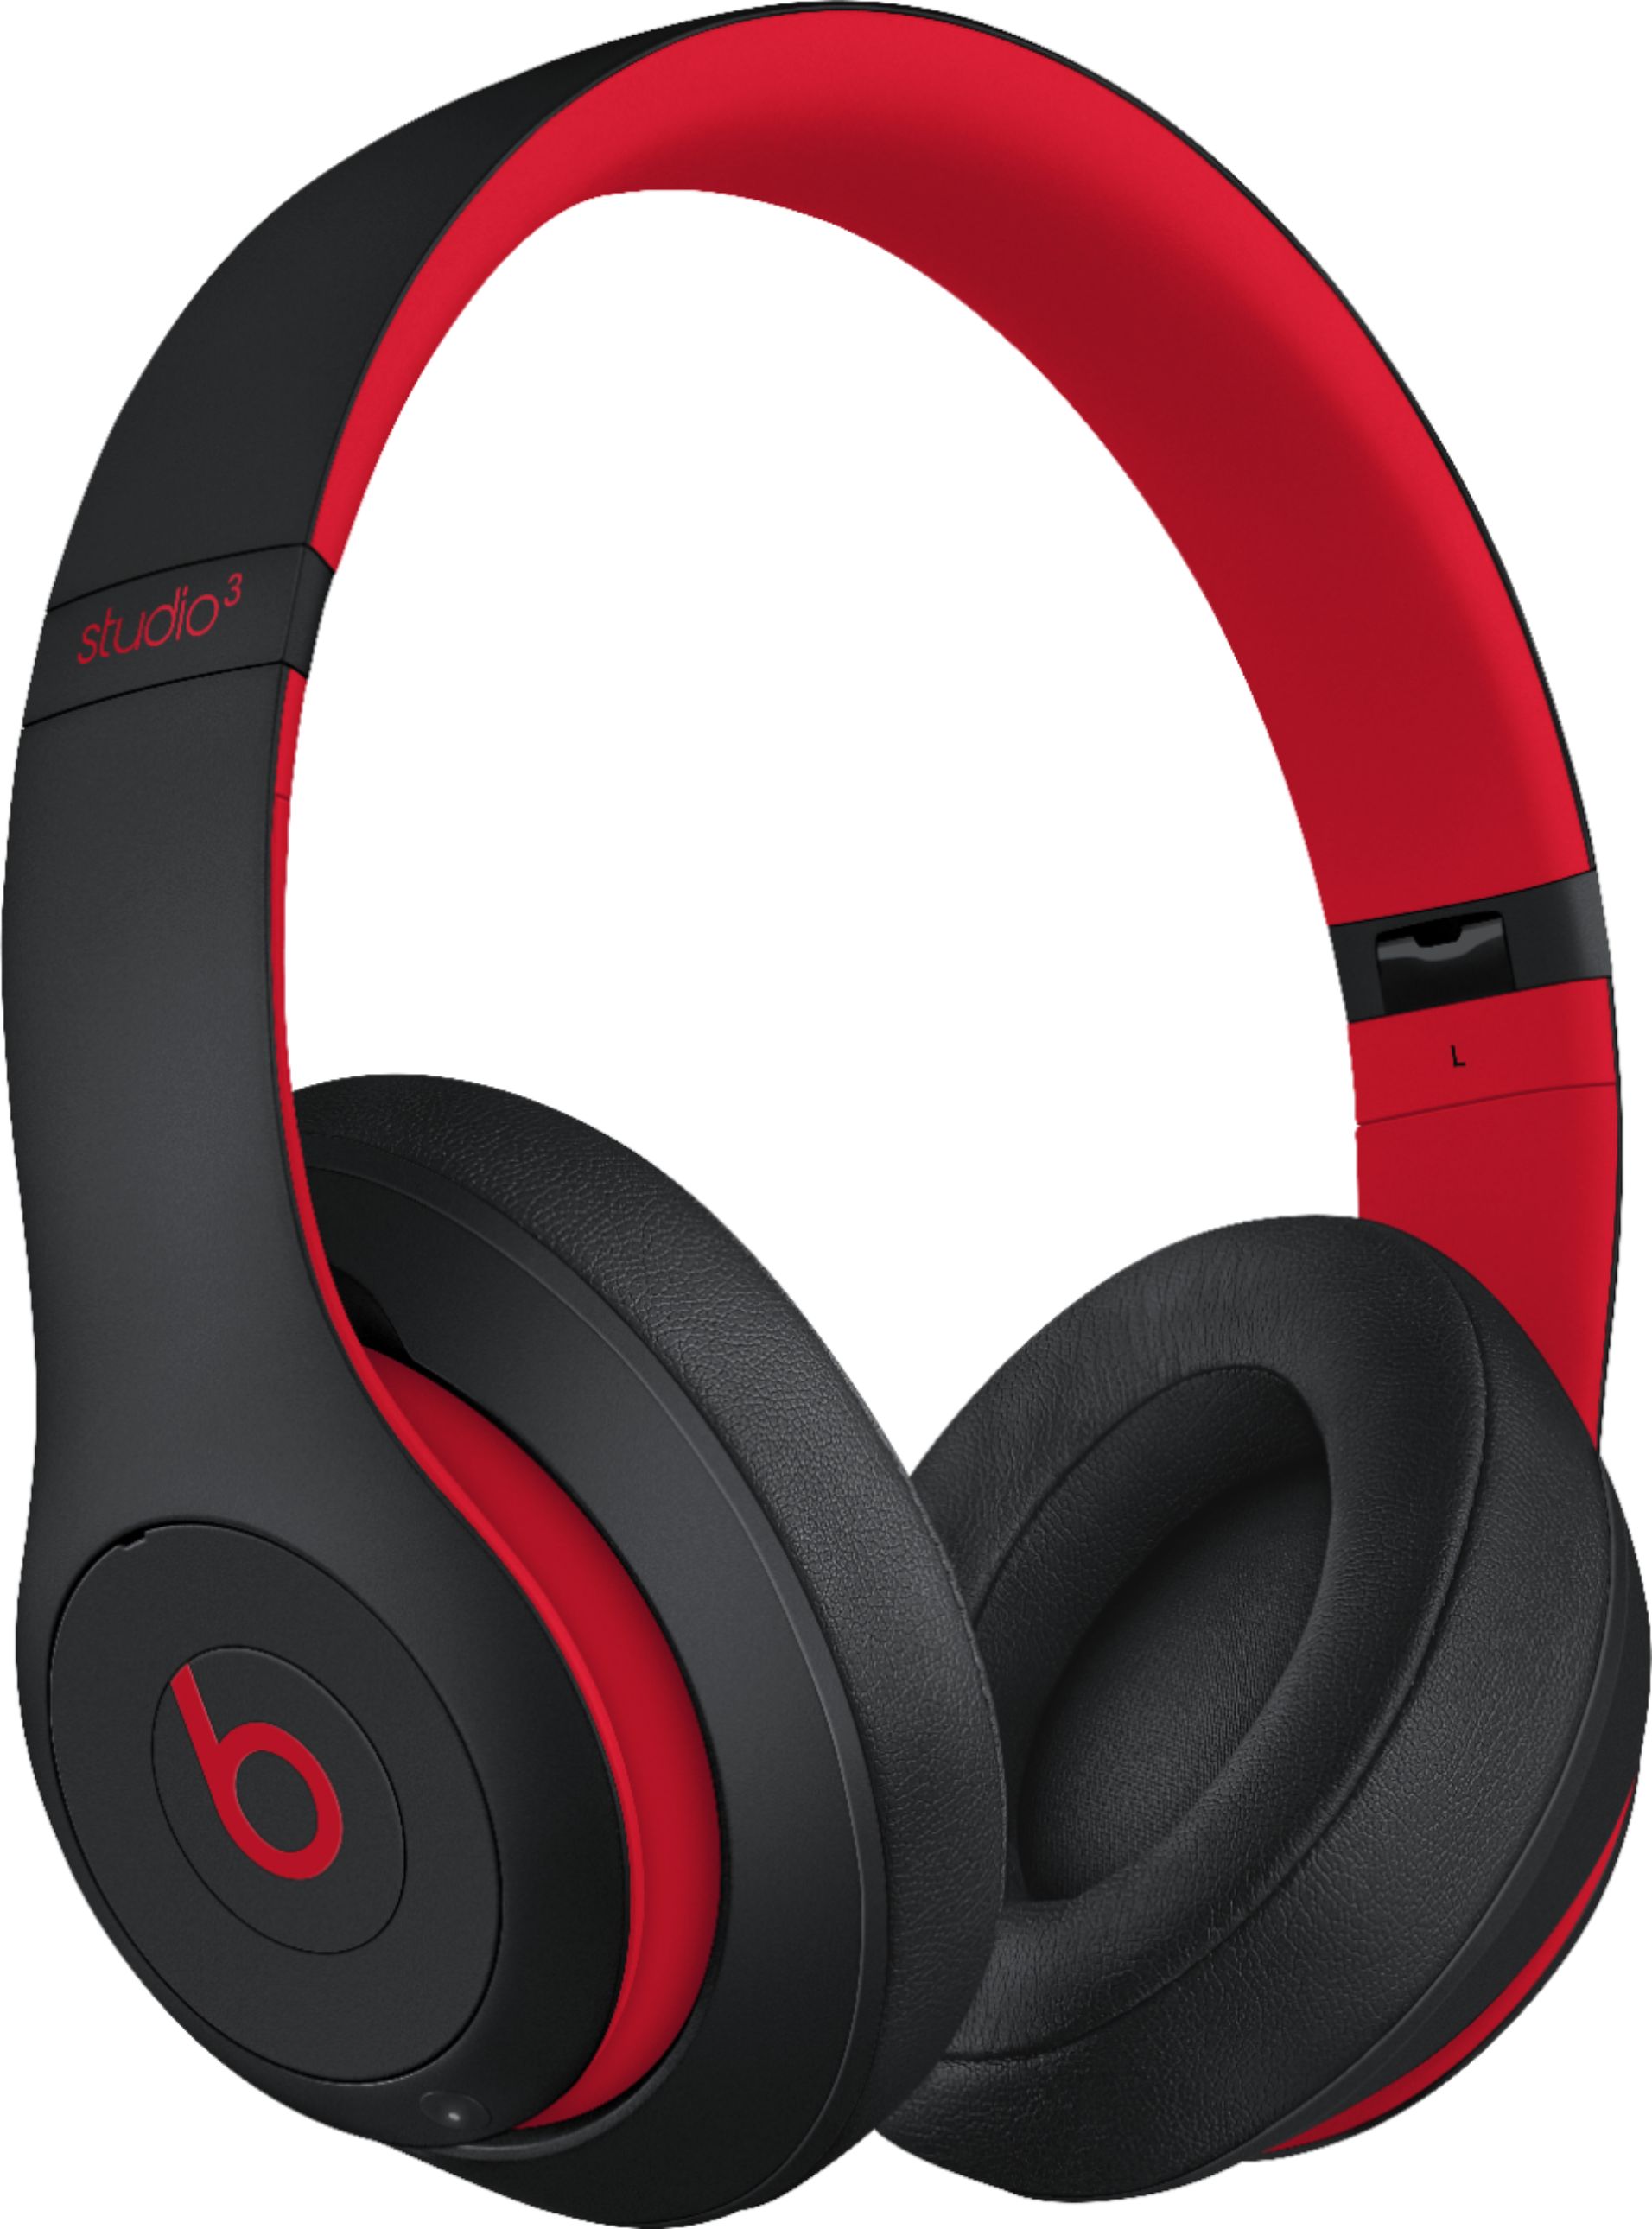 musiker Om indstilling Skal Beats by Dr. Dre Beats Studio³ Wireless Noise Cancelling Headphones Defiant  Black-Red (The Beats Decade Collection) MRQ82LL/A - Best Buy